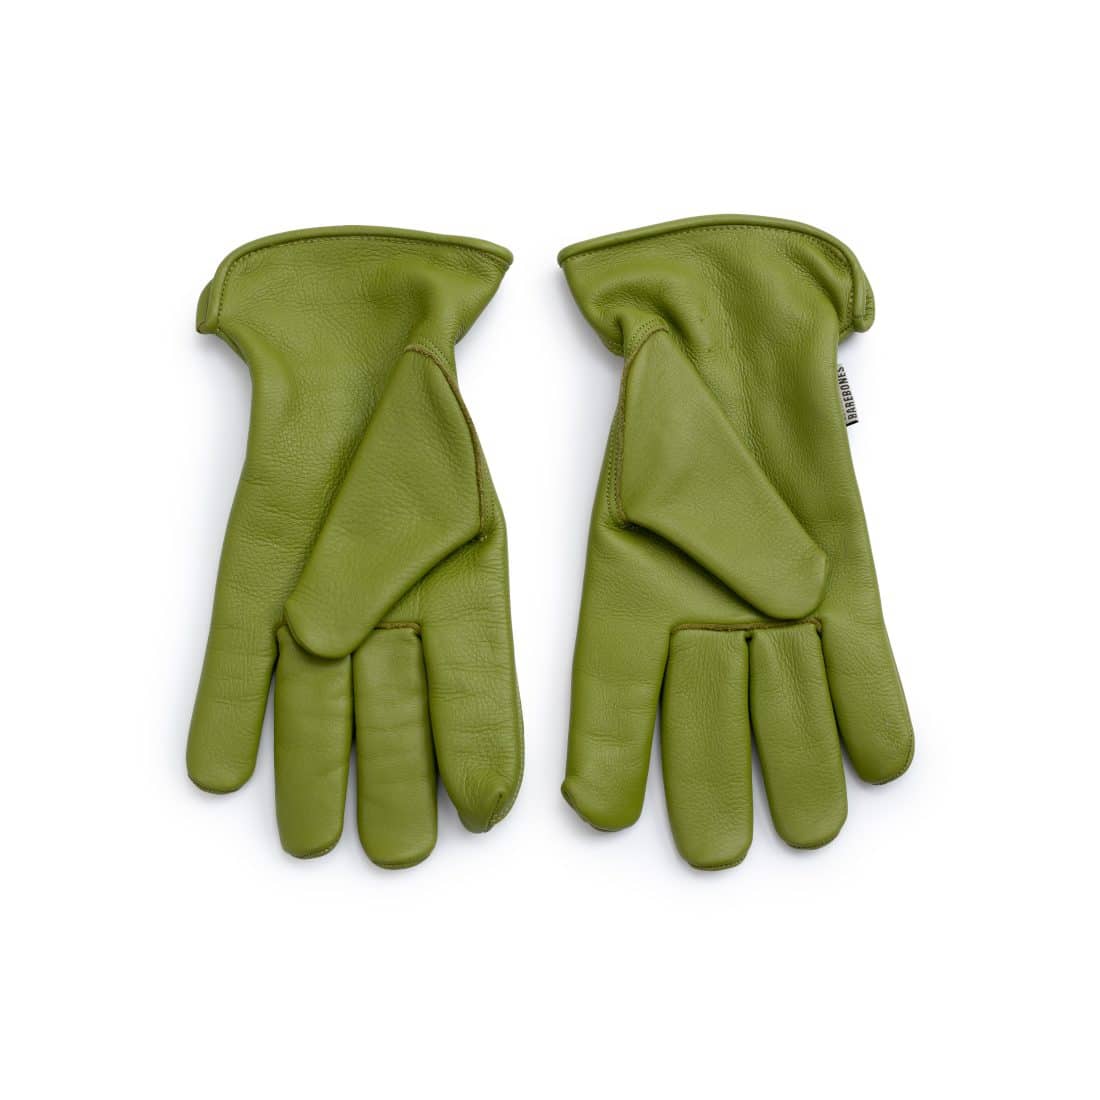 Trp Post Container Data Trp Post Id 17368 Classic Work Glove Olive Trp Post Container